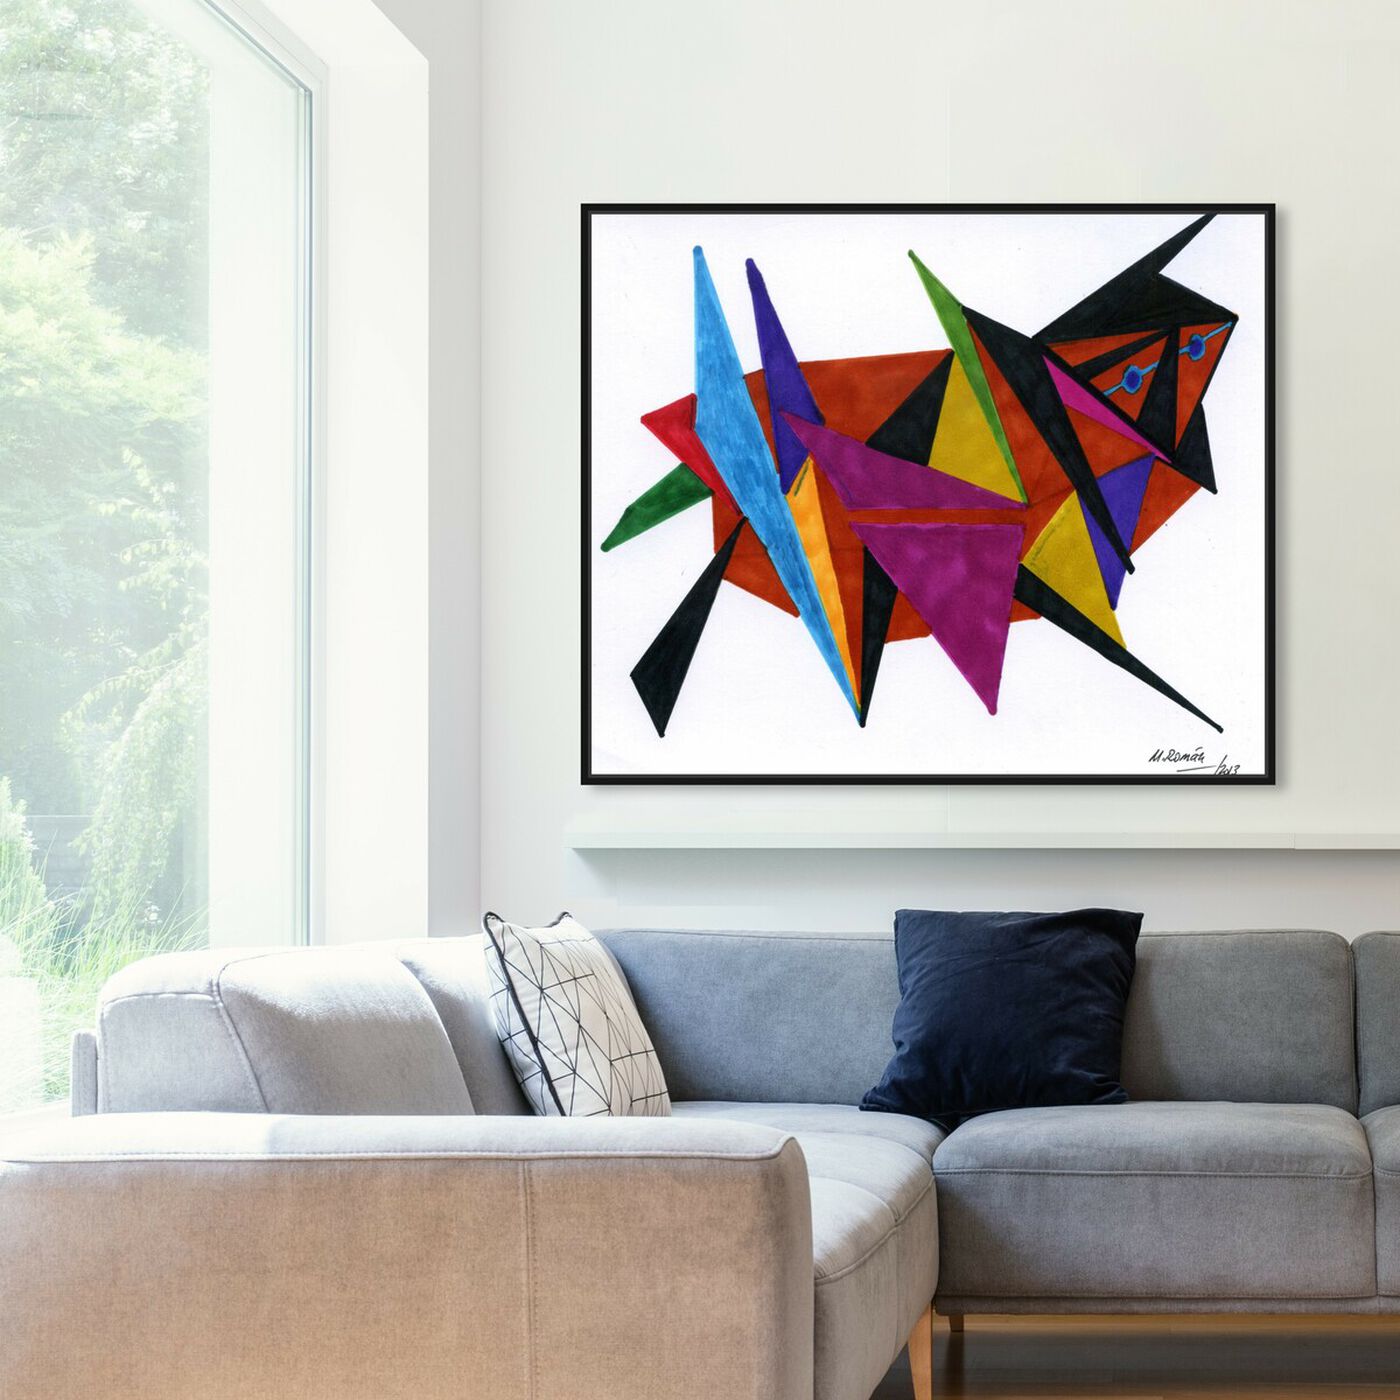 Hanging view of Perro featuring abstract and geometric art.